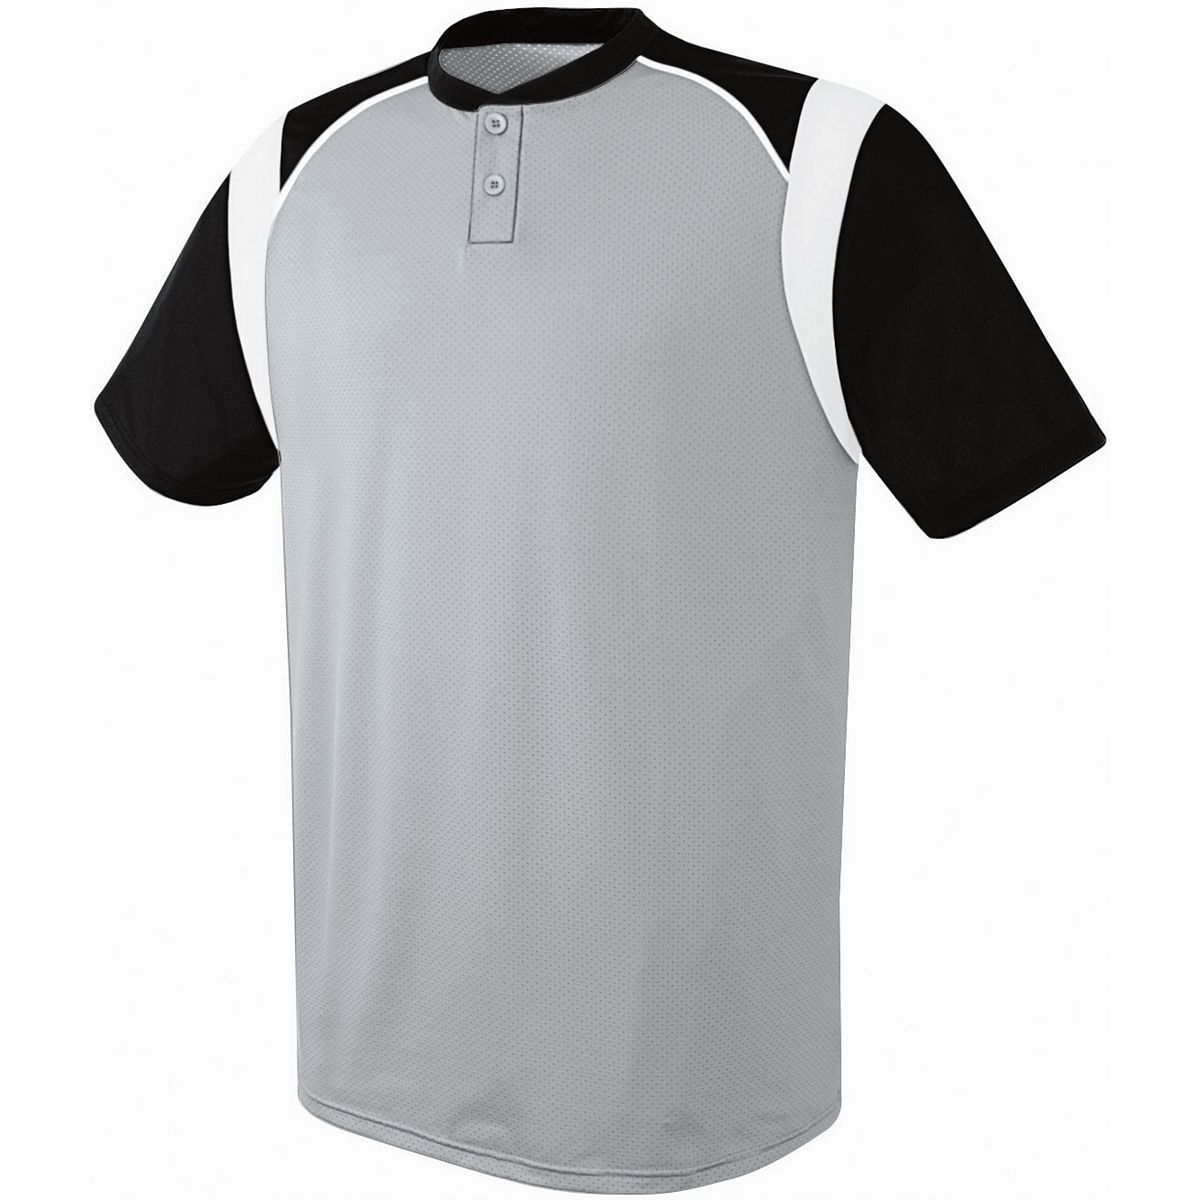 Augusta Sportswear Wildcard Two-Button Jersey in Silver Grey/Black/White  -Part of the Adult, Adult-Jersey, Augusta-Products, Baseball, Shirts, All-Sports, All-Sports-1 product lines at KanaleyCreations.com